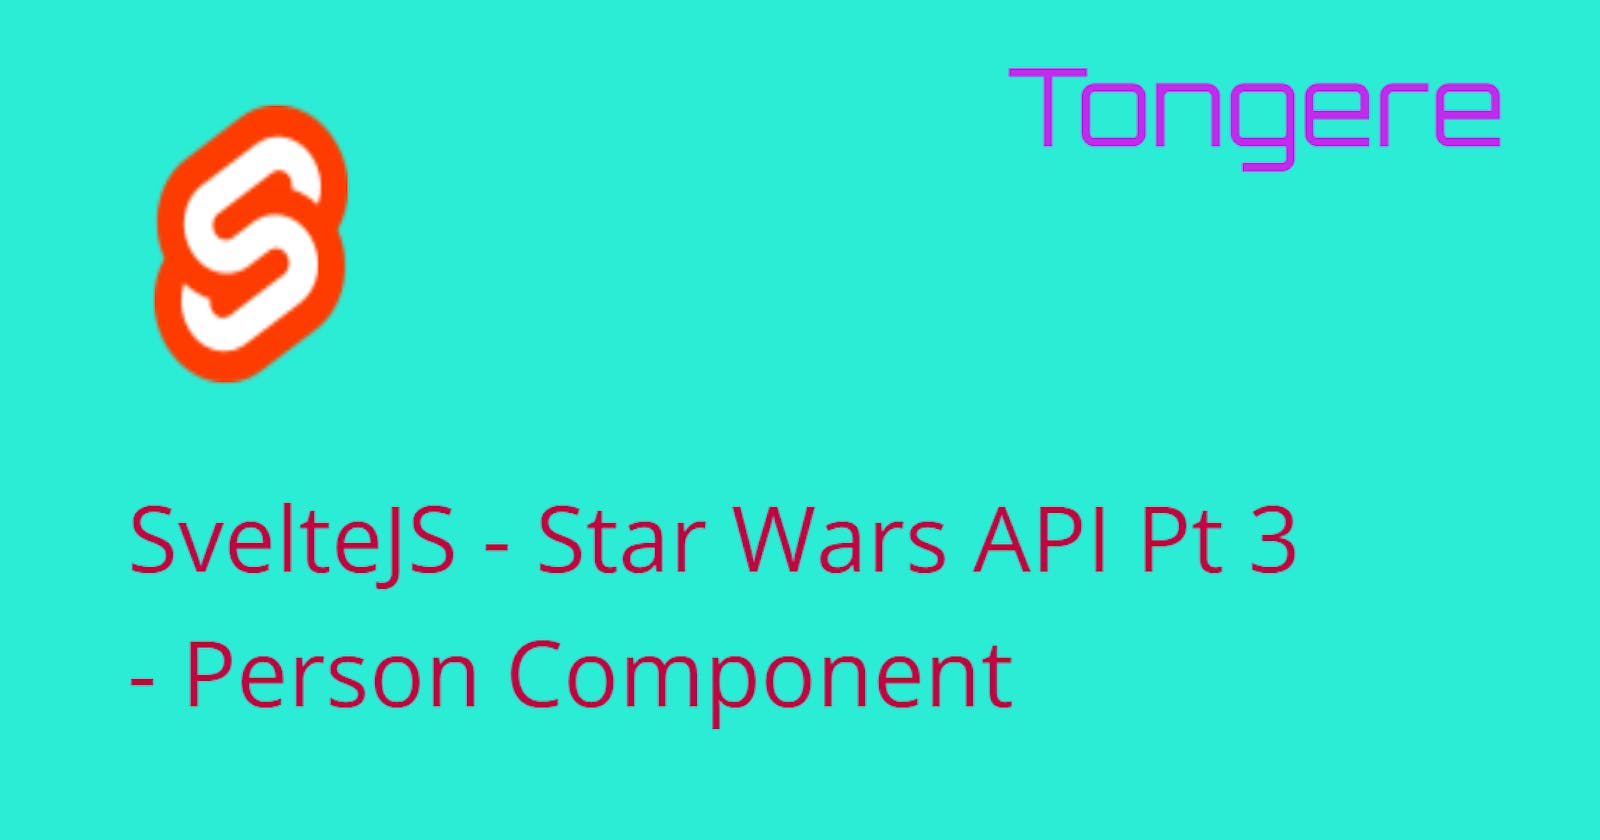 Svelte App using the Star Wars API Pt 3, The Person Component